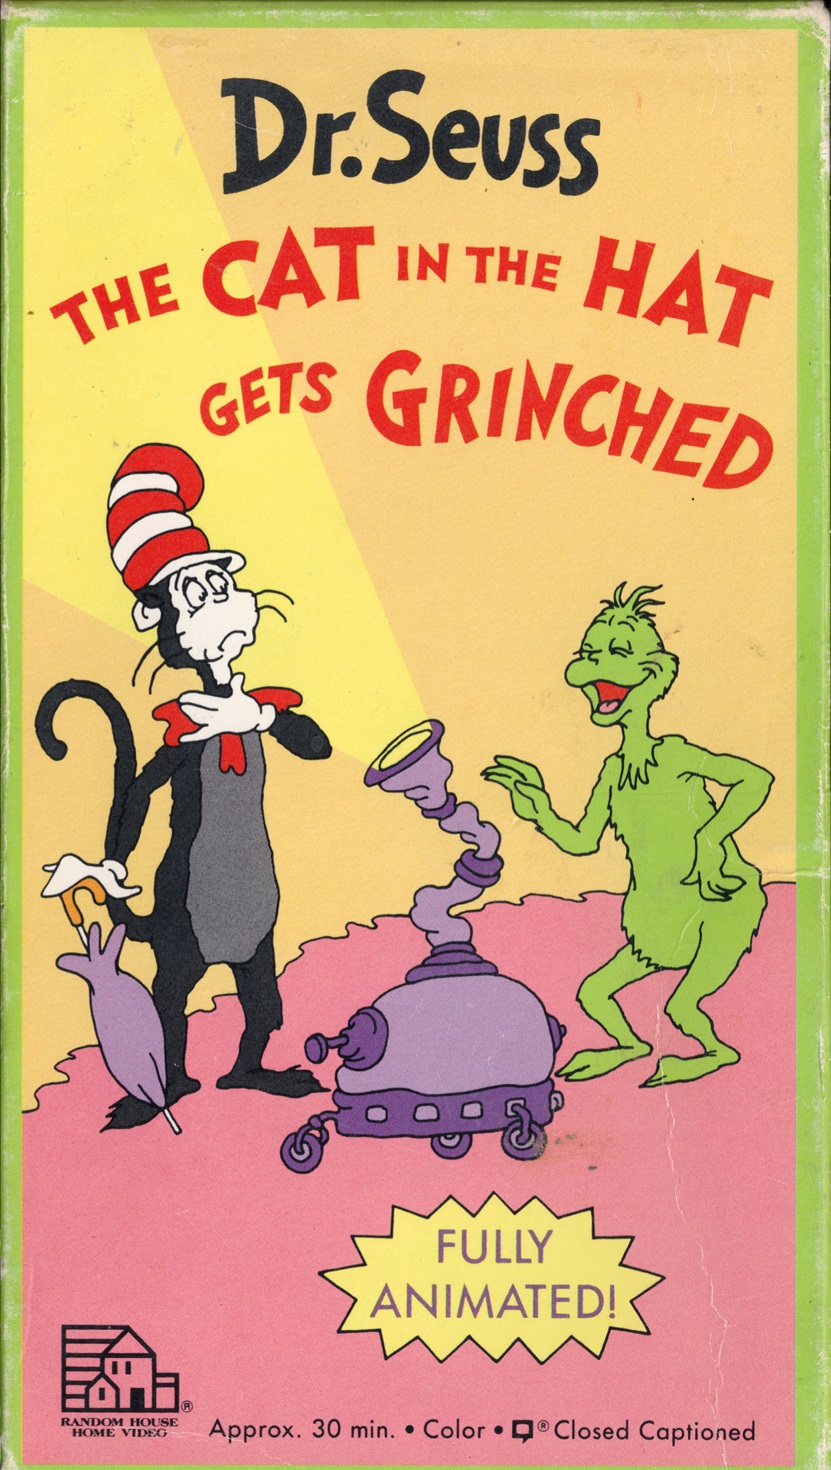 The Grinch Grinches the Cat in the Hat (1985-1997 VHS) | Twilight